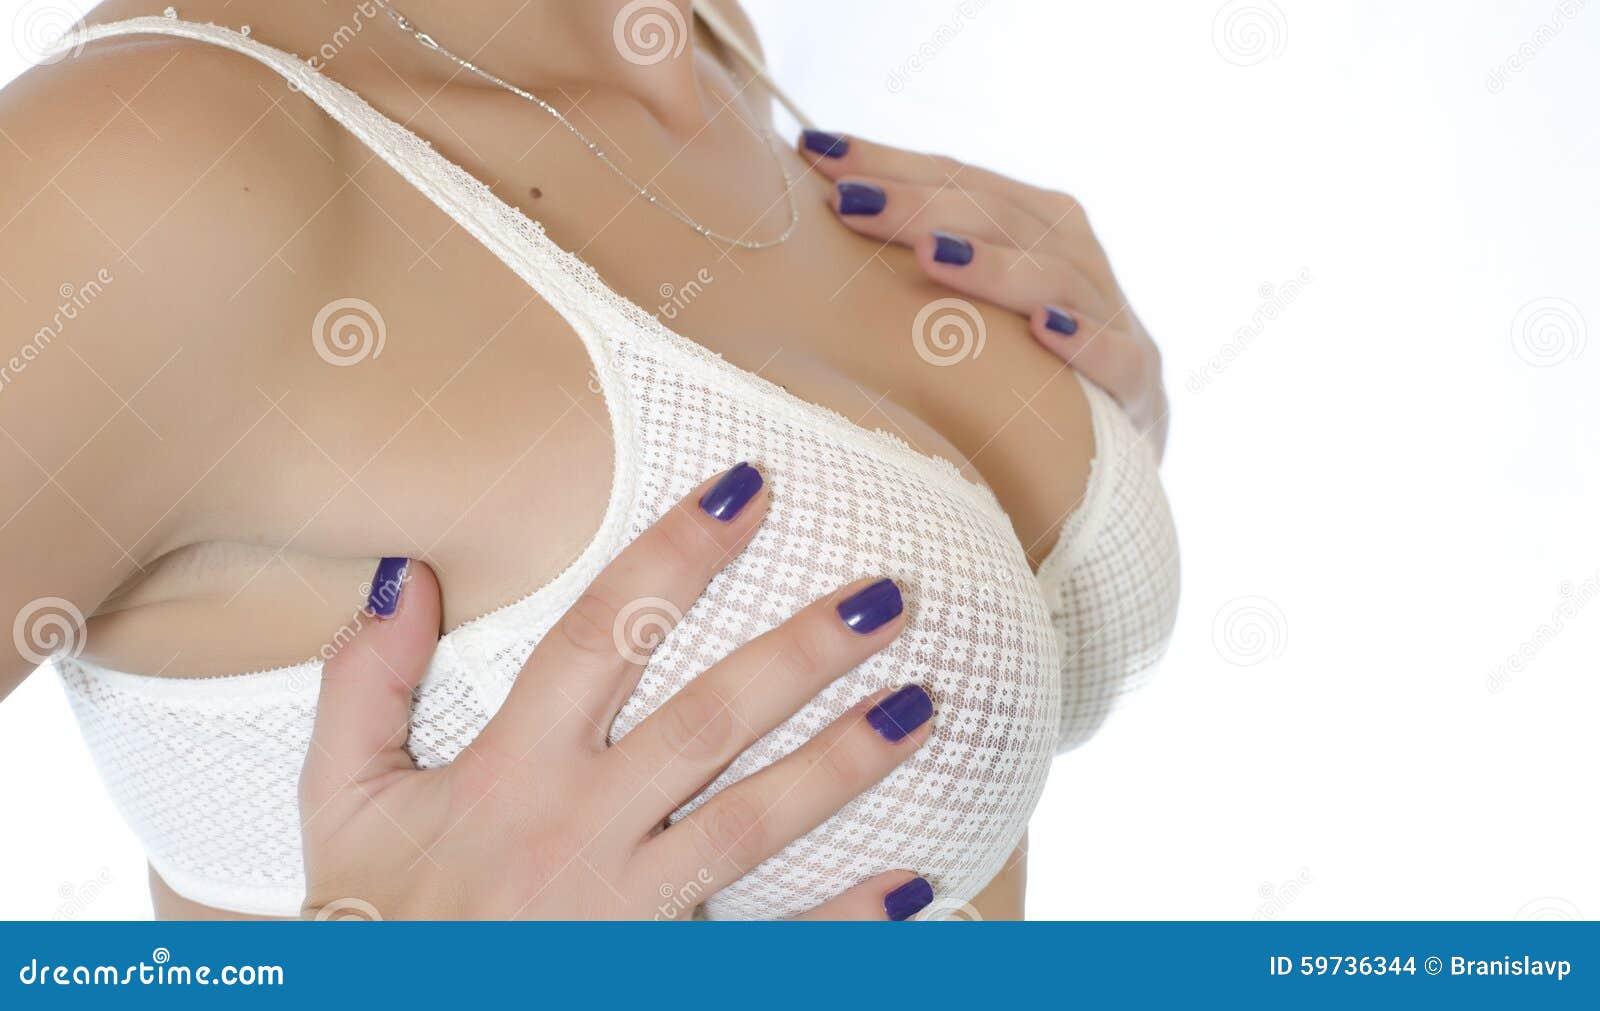 girl with silicone breast implants and bra